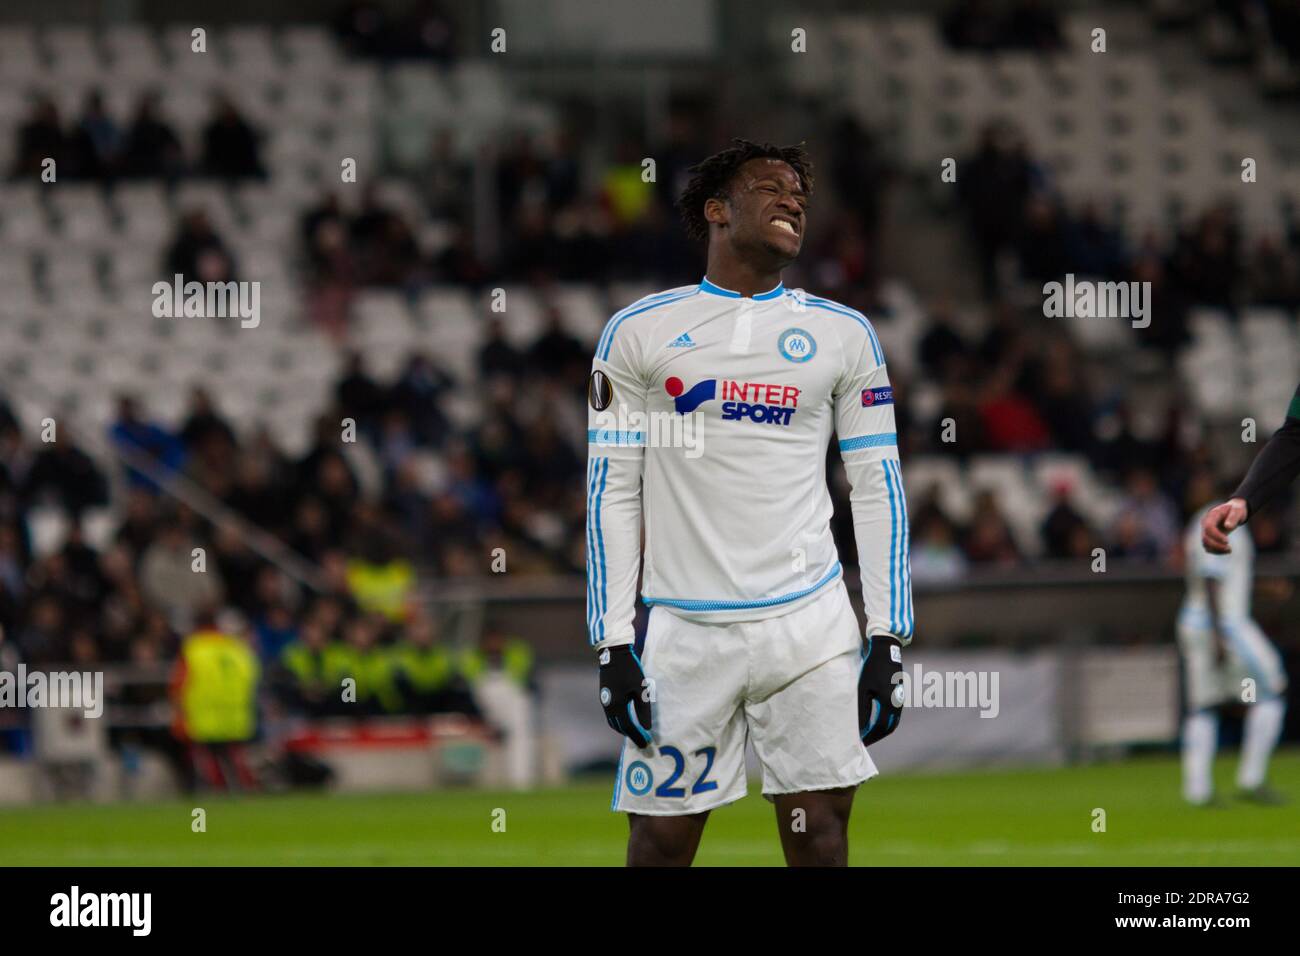 Marseille's Michy Batshuayi during the UEFA Europa League Group F soccer match, Olympique de Marseille Vs FC Groningen at Stade Vélodrome in Marseille, France on November 27th, 2015. Photo by Guillaume Chagnard/ABACAPRESS.COM Stock Photo